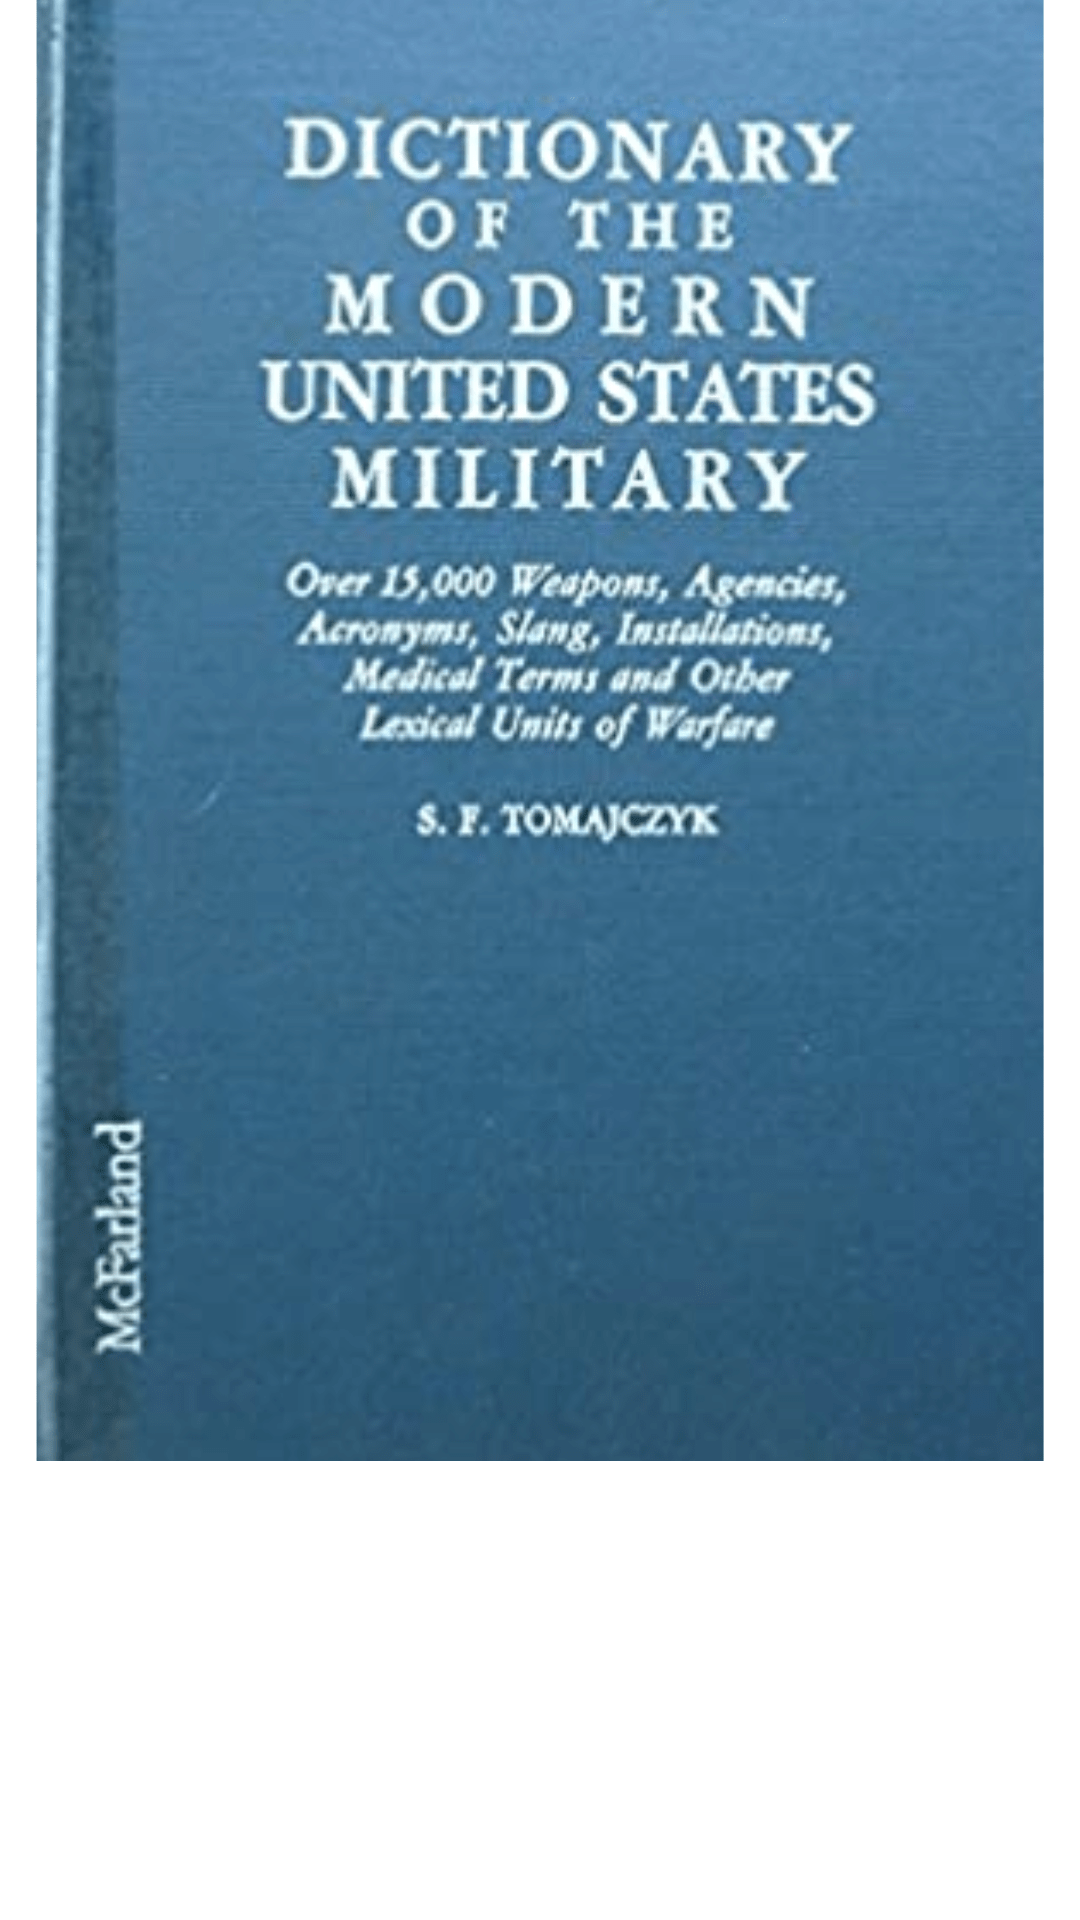 Dictionary of the Modern United States Military : Over 15, 000 Weapons, Agencies, Acronyms, Slang, Installations, Medical Terms and Other Lexical Units of Warfare